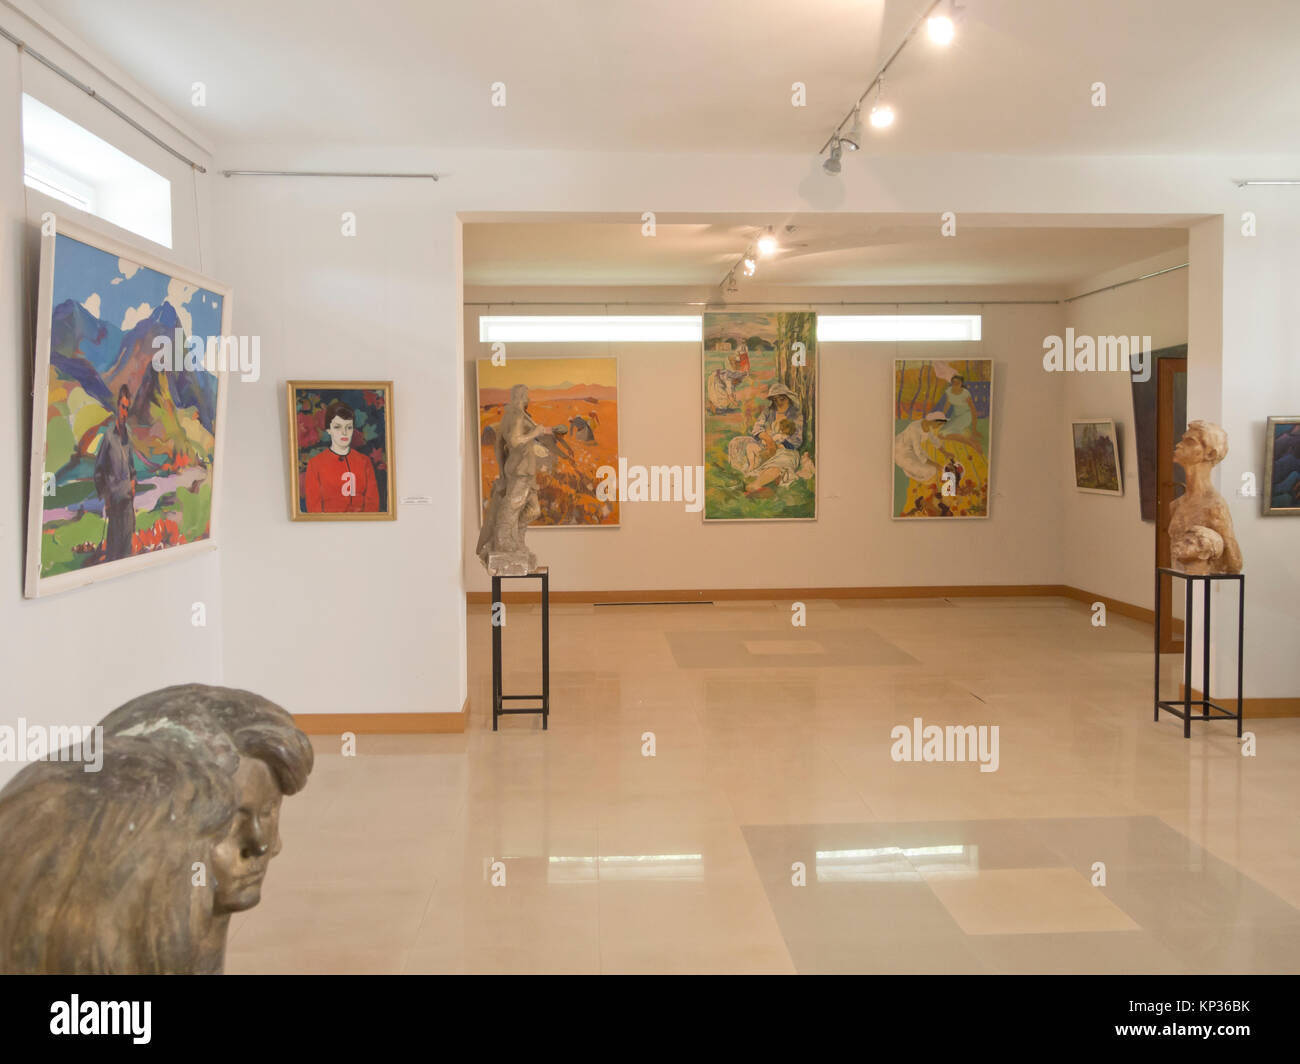 Dilijan museum of local history in Dilijan Armenia, impressive collection of European and Armenian art, interior with artwork Stock Photo